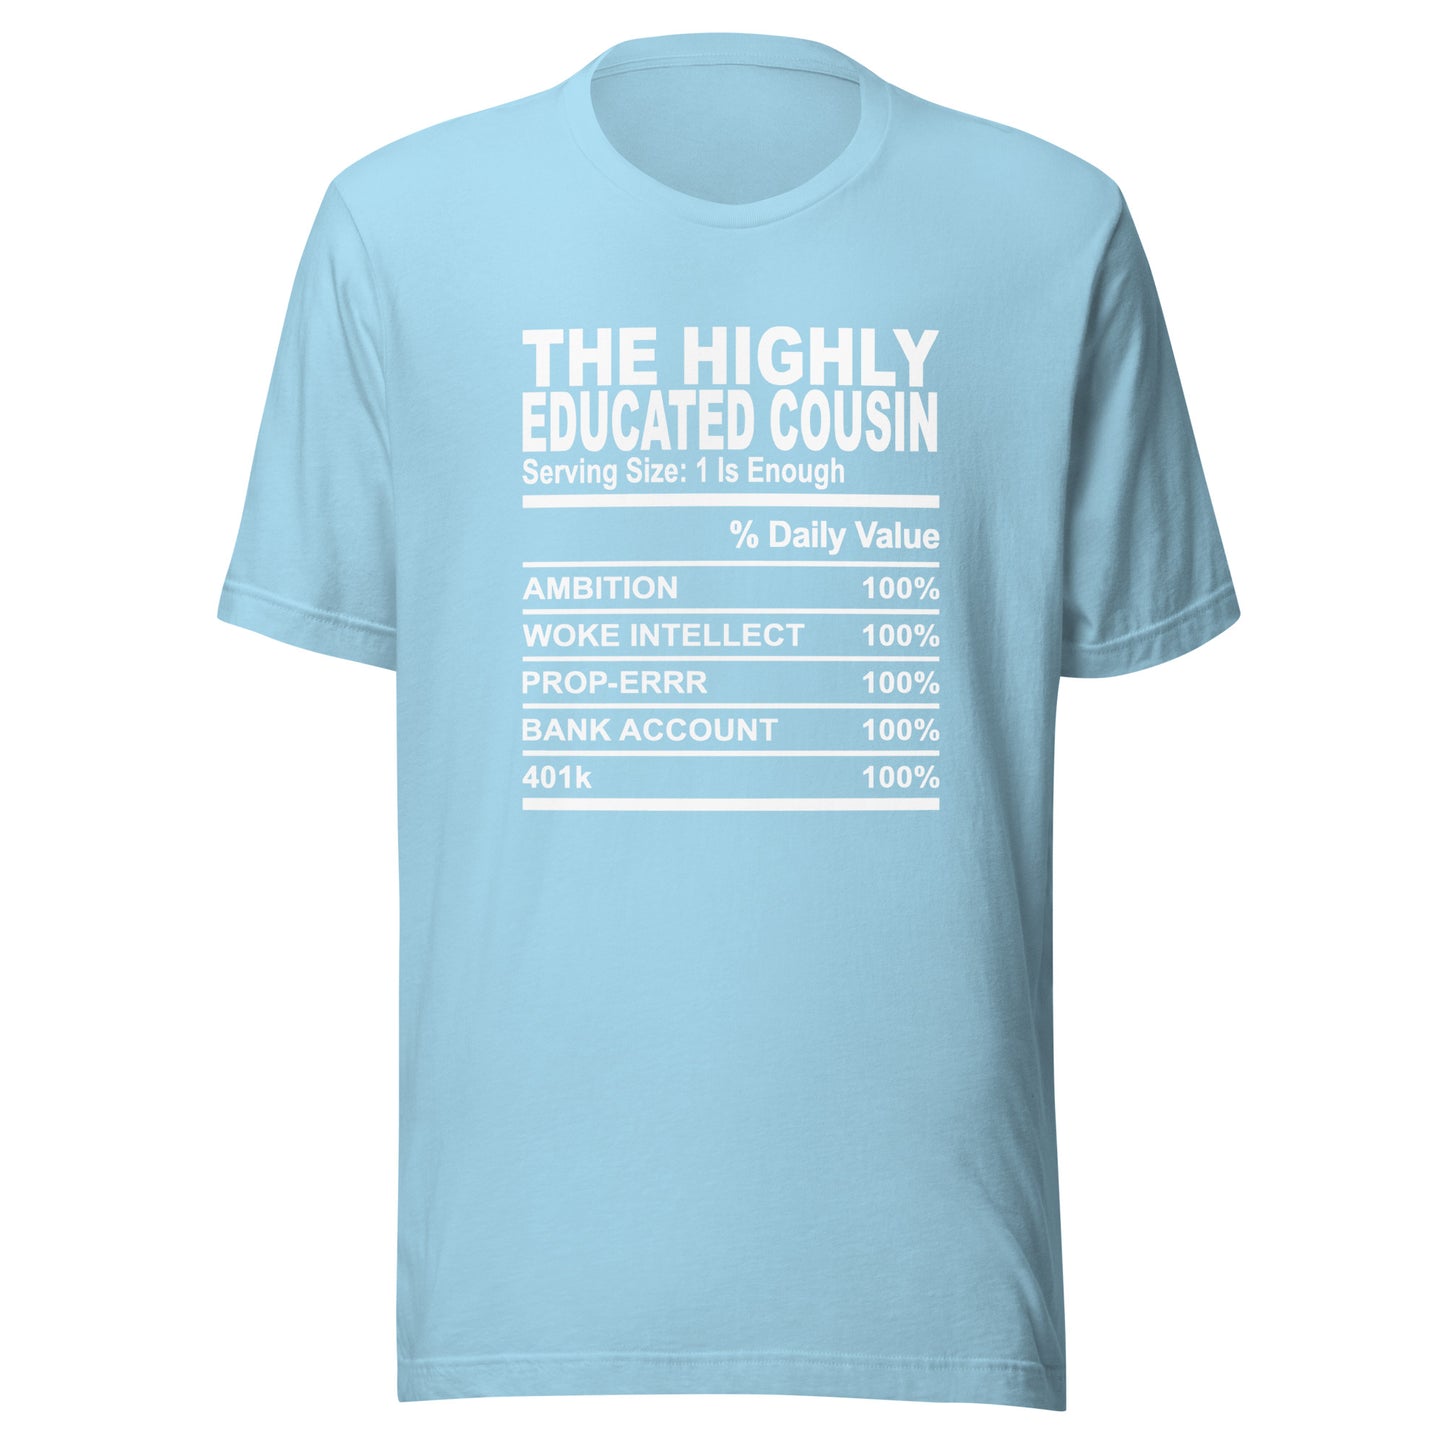 THE HIGHLY EDUCATED COUSIN - 2XL-3XL - Unisex T-Shirt (white print)